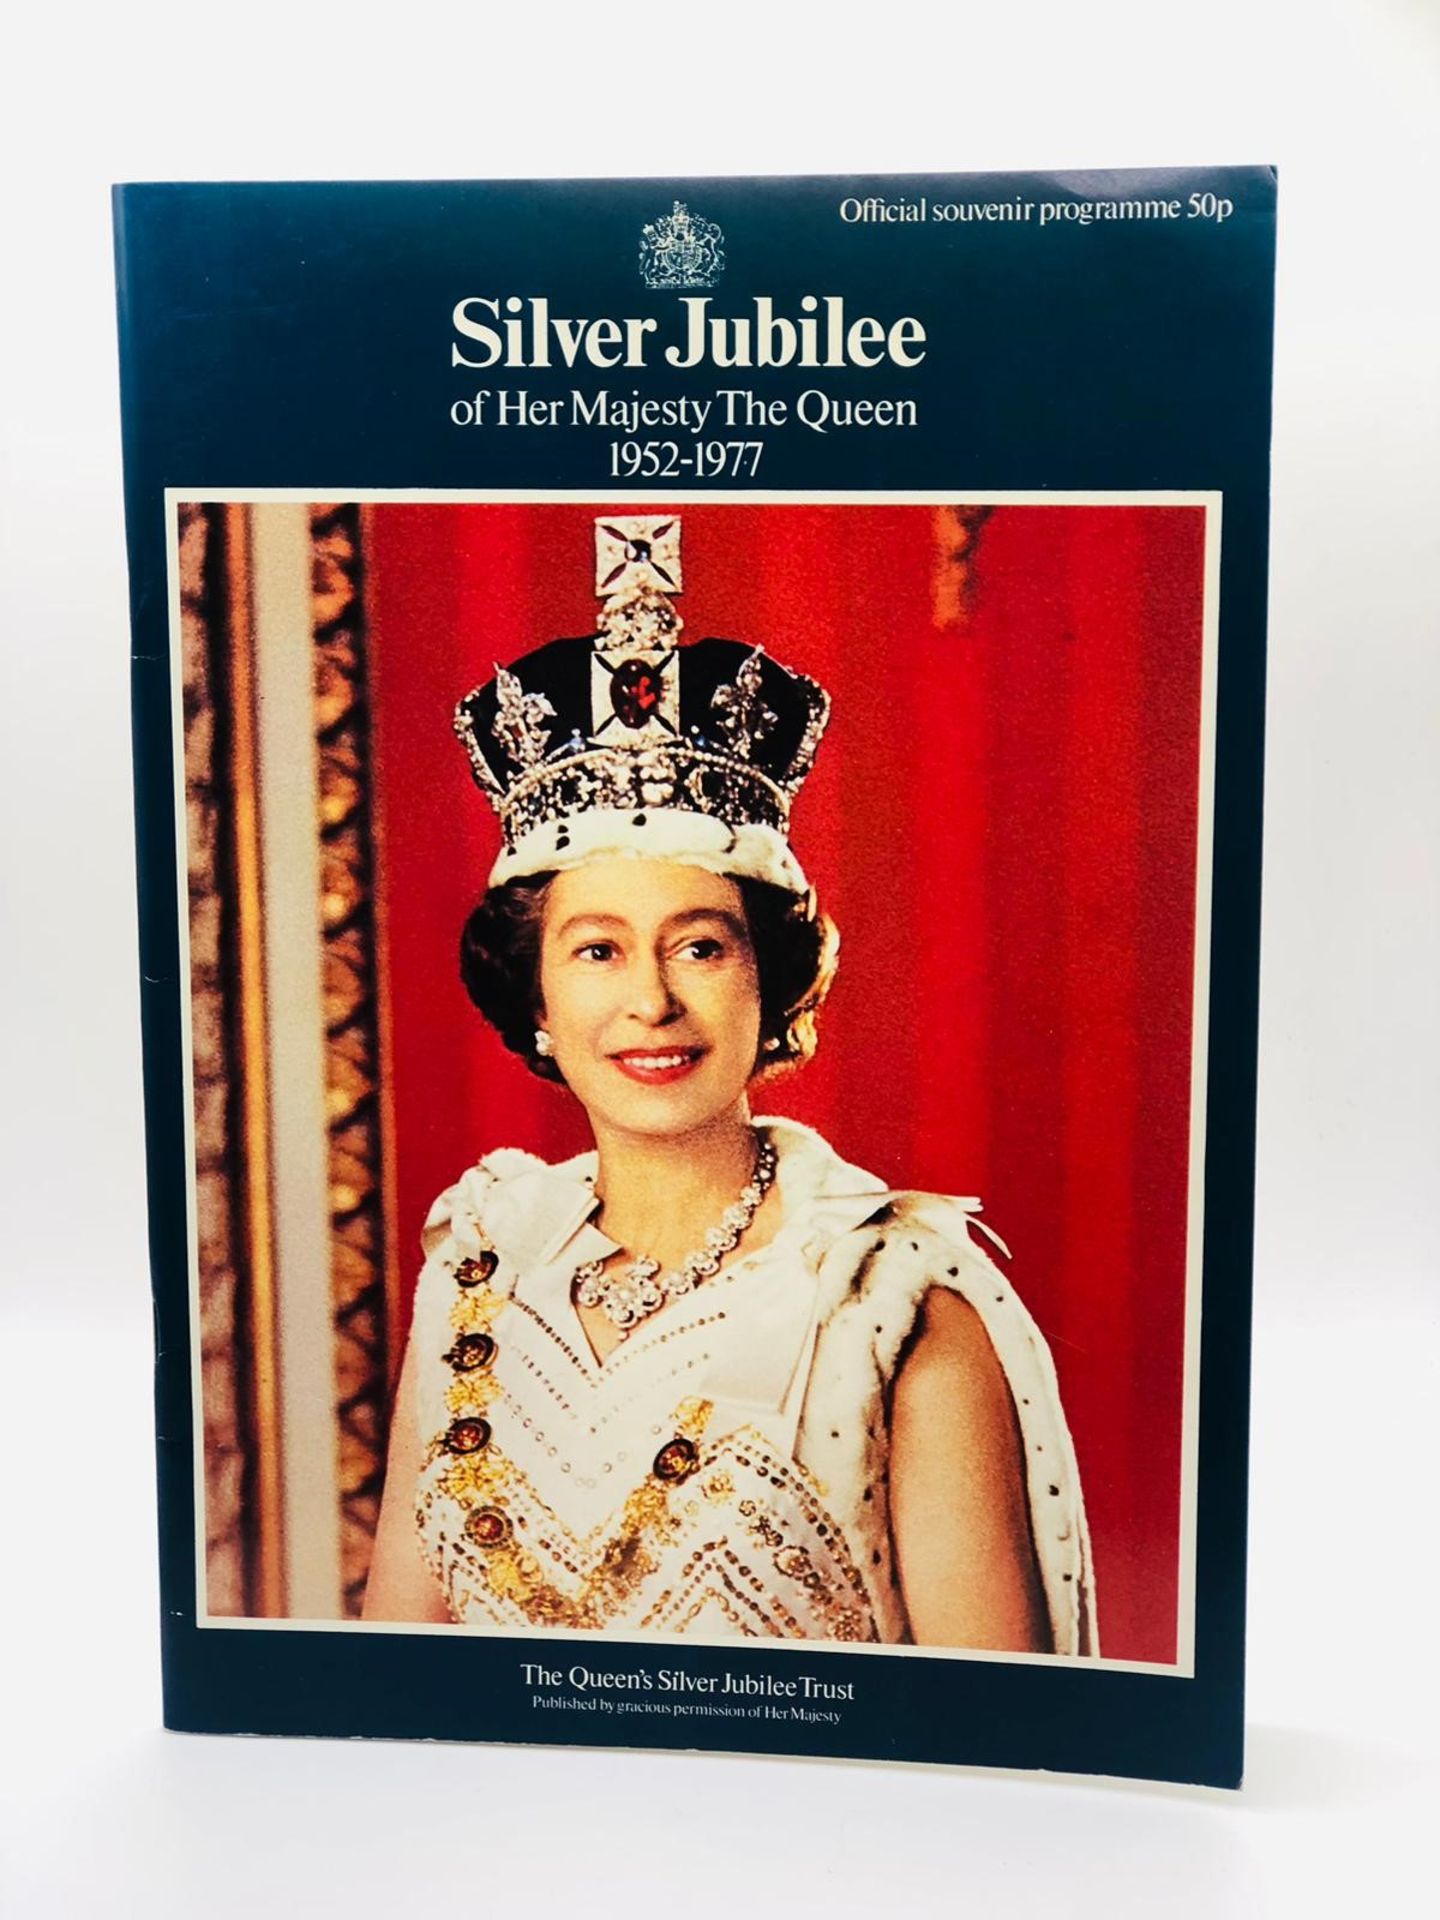 Royal family Memorabilia Silver Jubilee of Her Majesty The Queen 1953-1977 Official Programme - Image 5 of 5